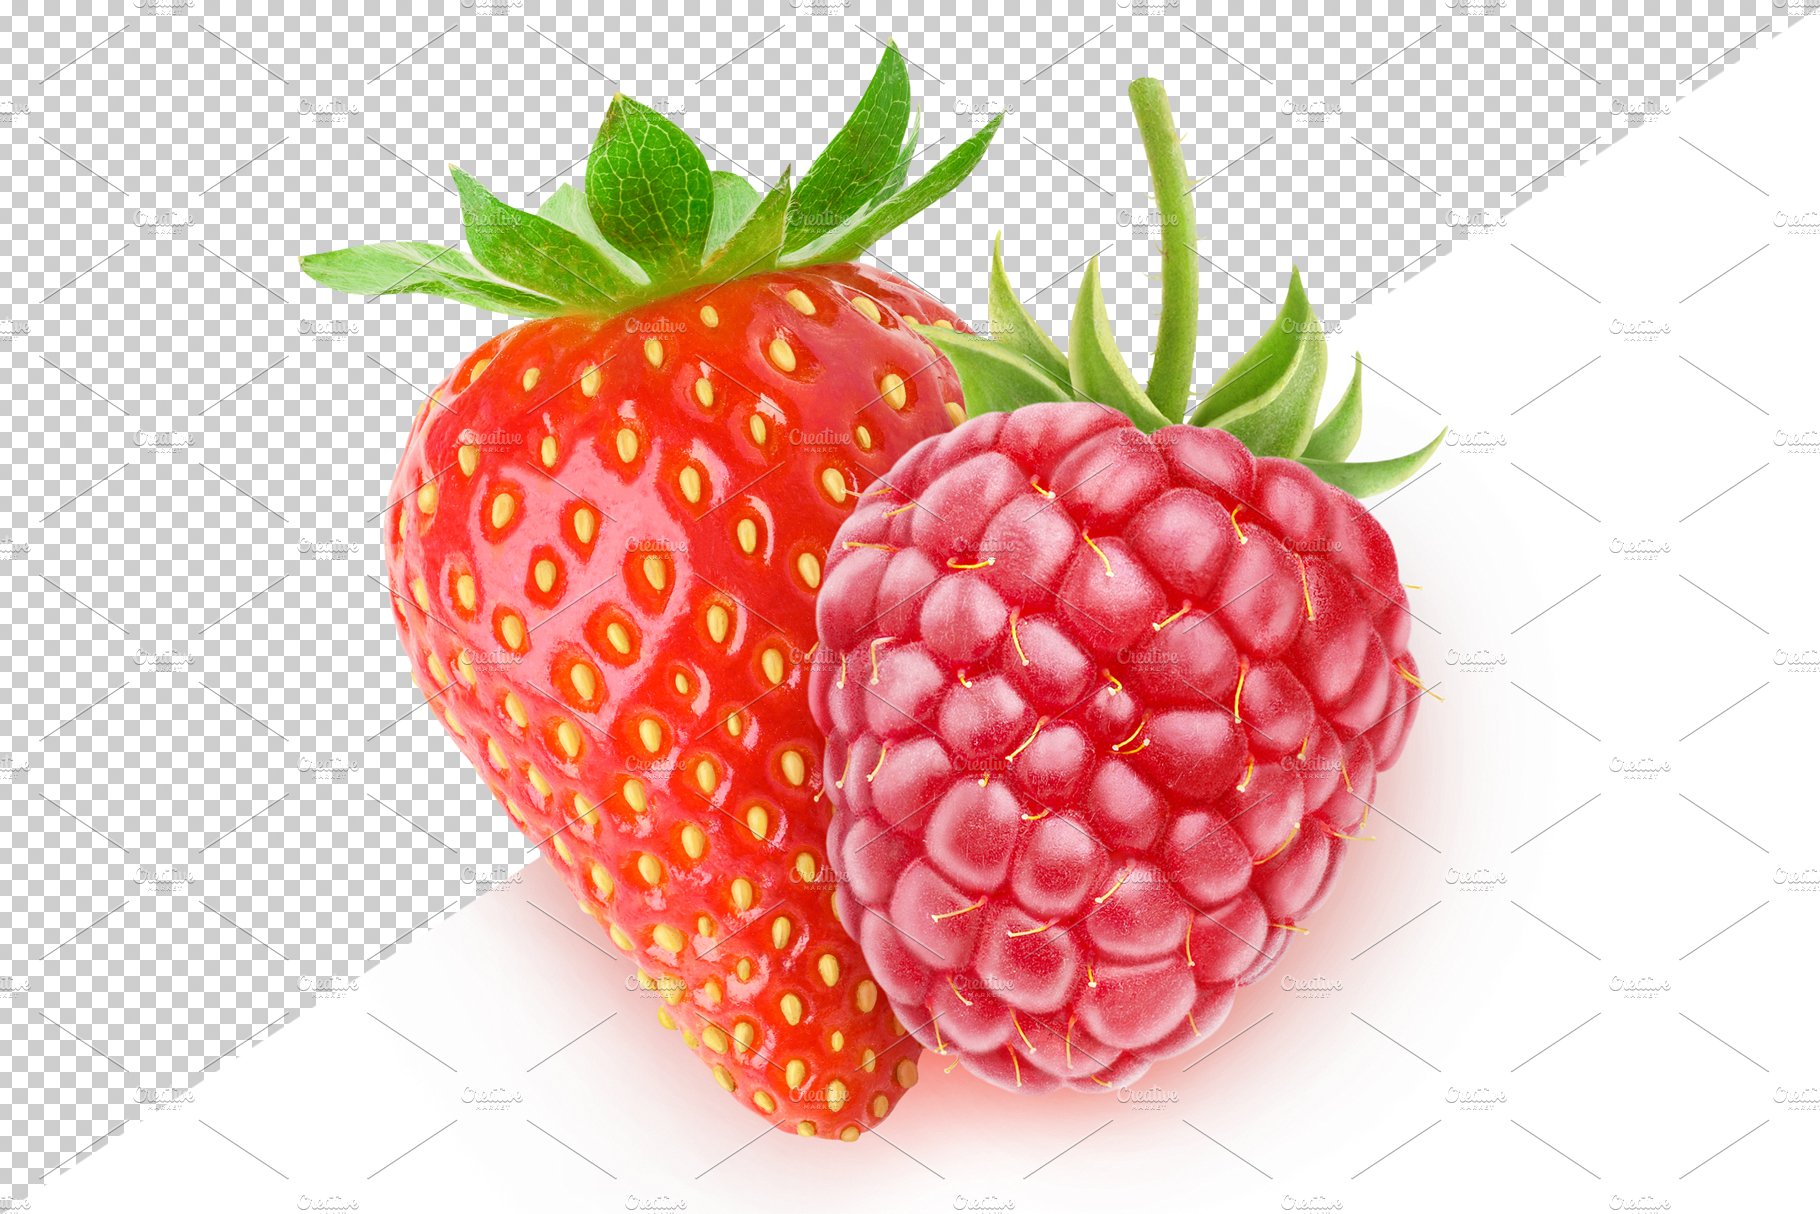 Strawberry and raspberry preview image.